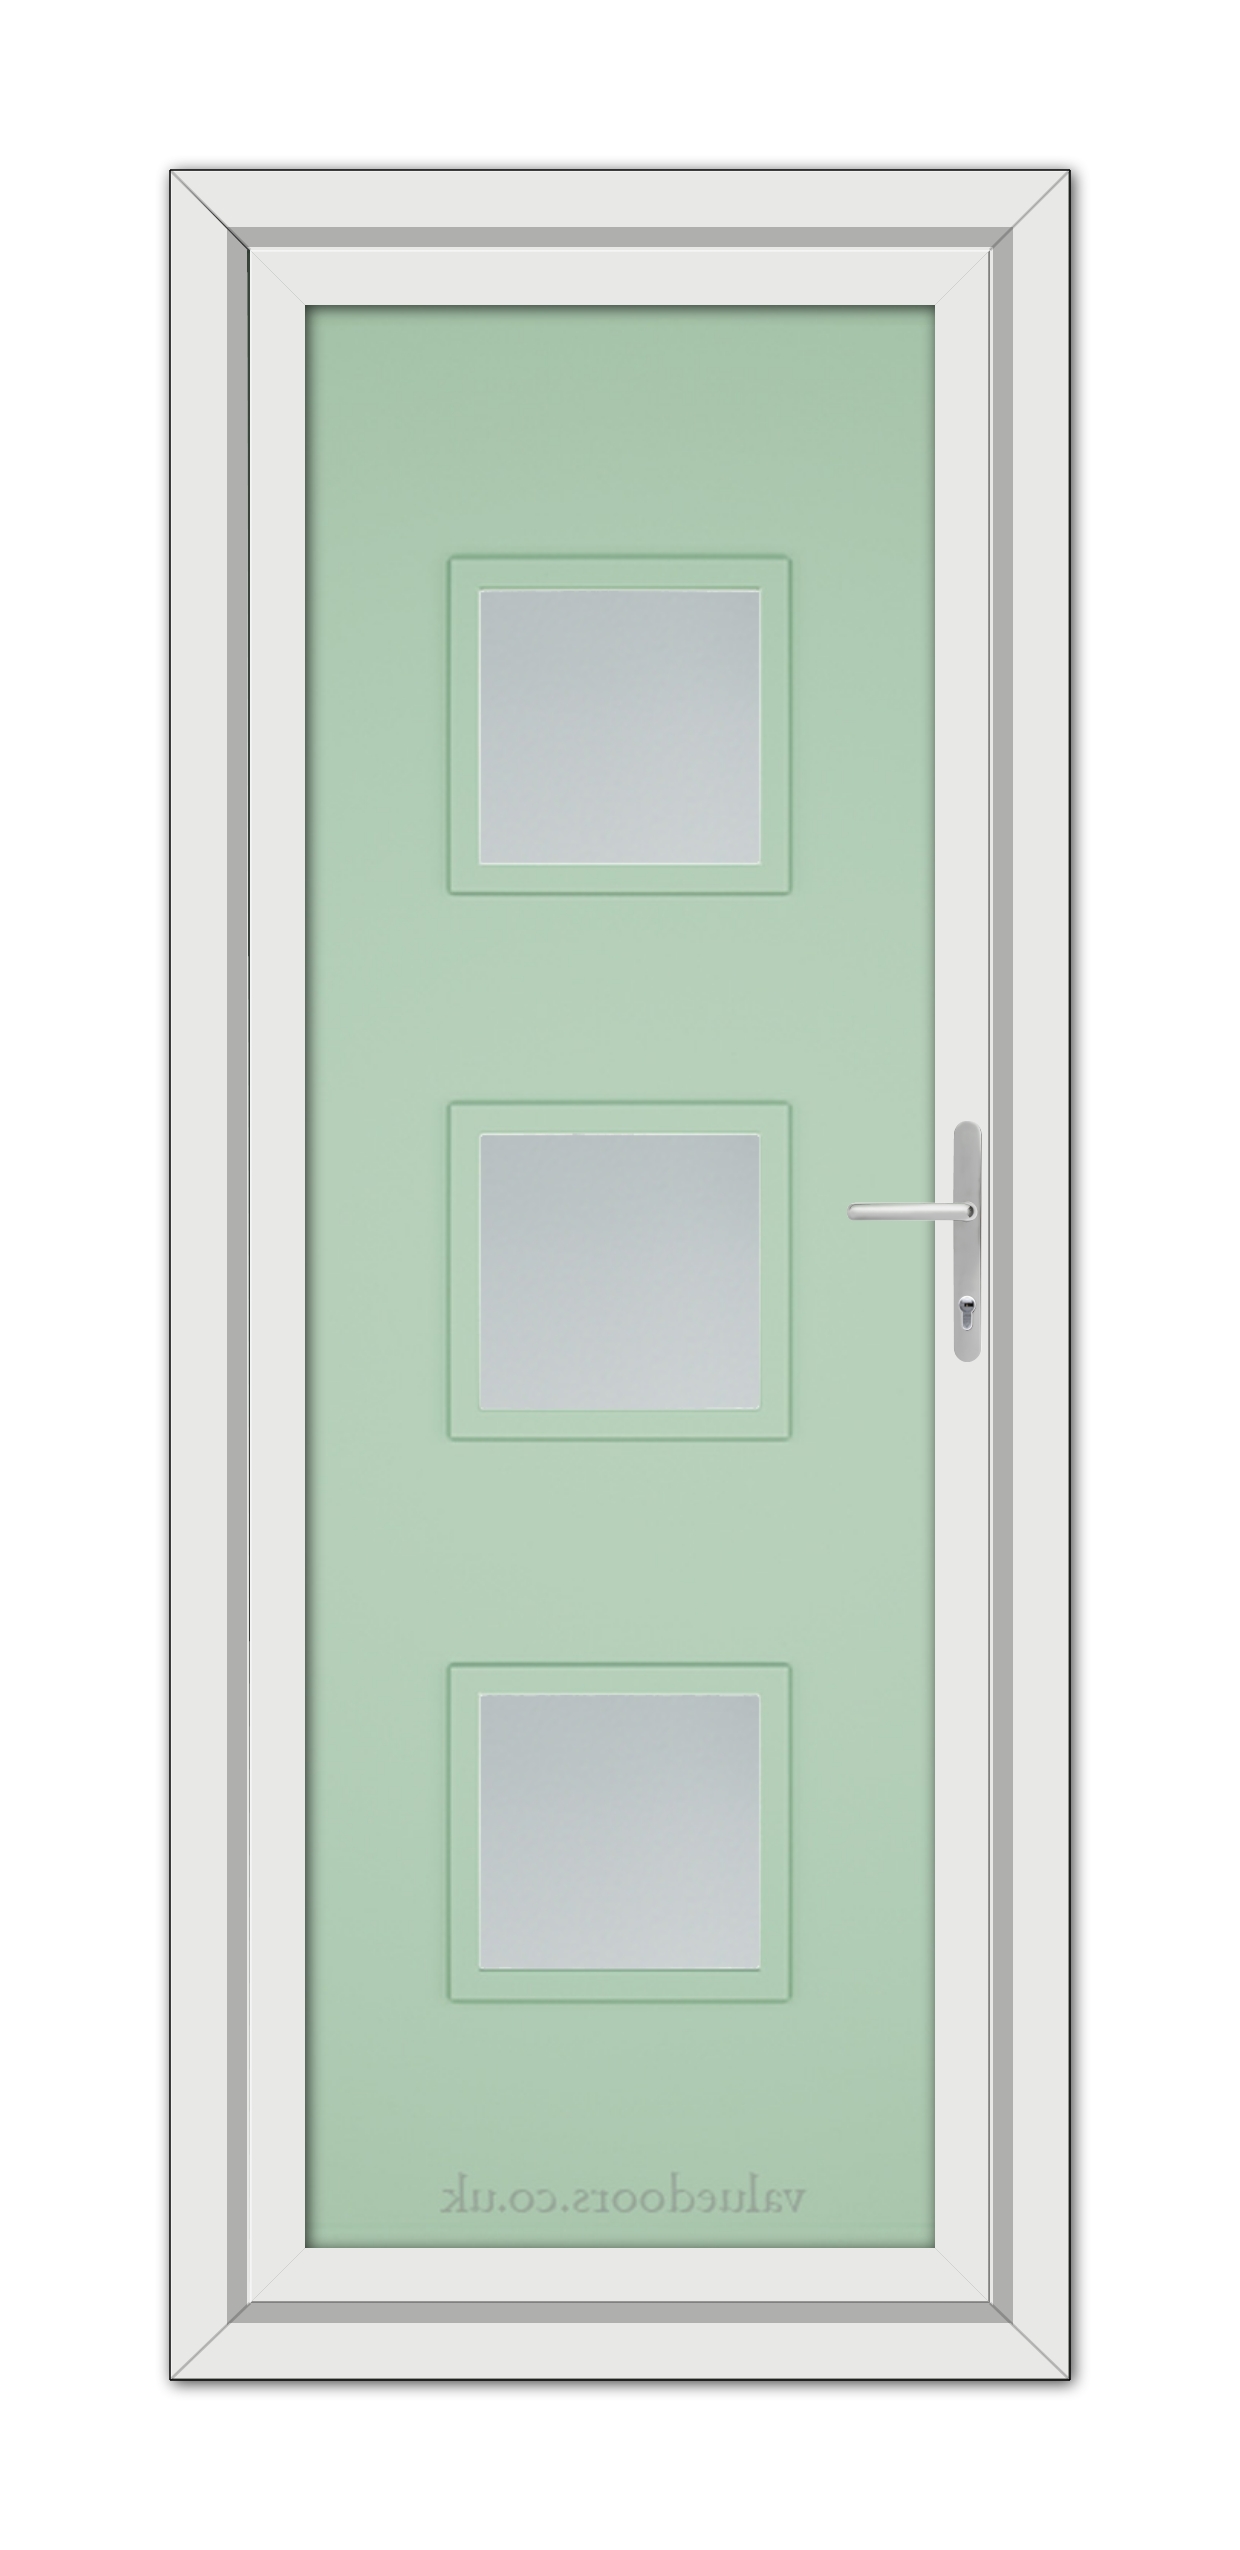 A Chartwell Green Modern 5013 uPVC Door with a white frame, featuring three rectangular frosted glass panels and a modern silver handle.